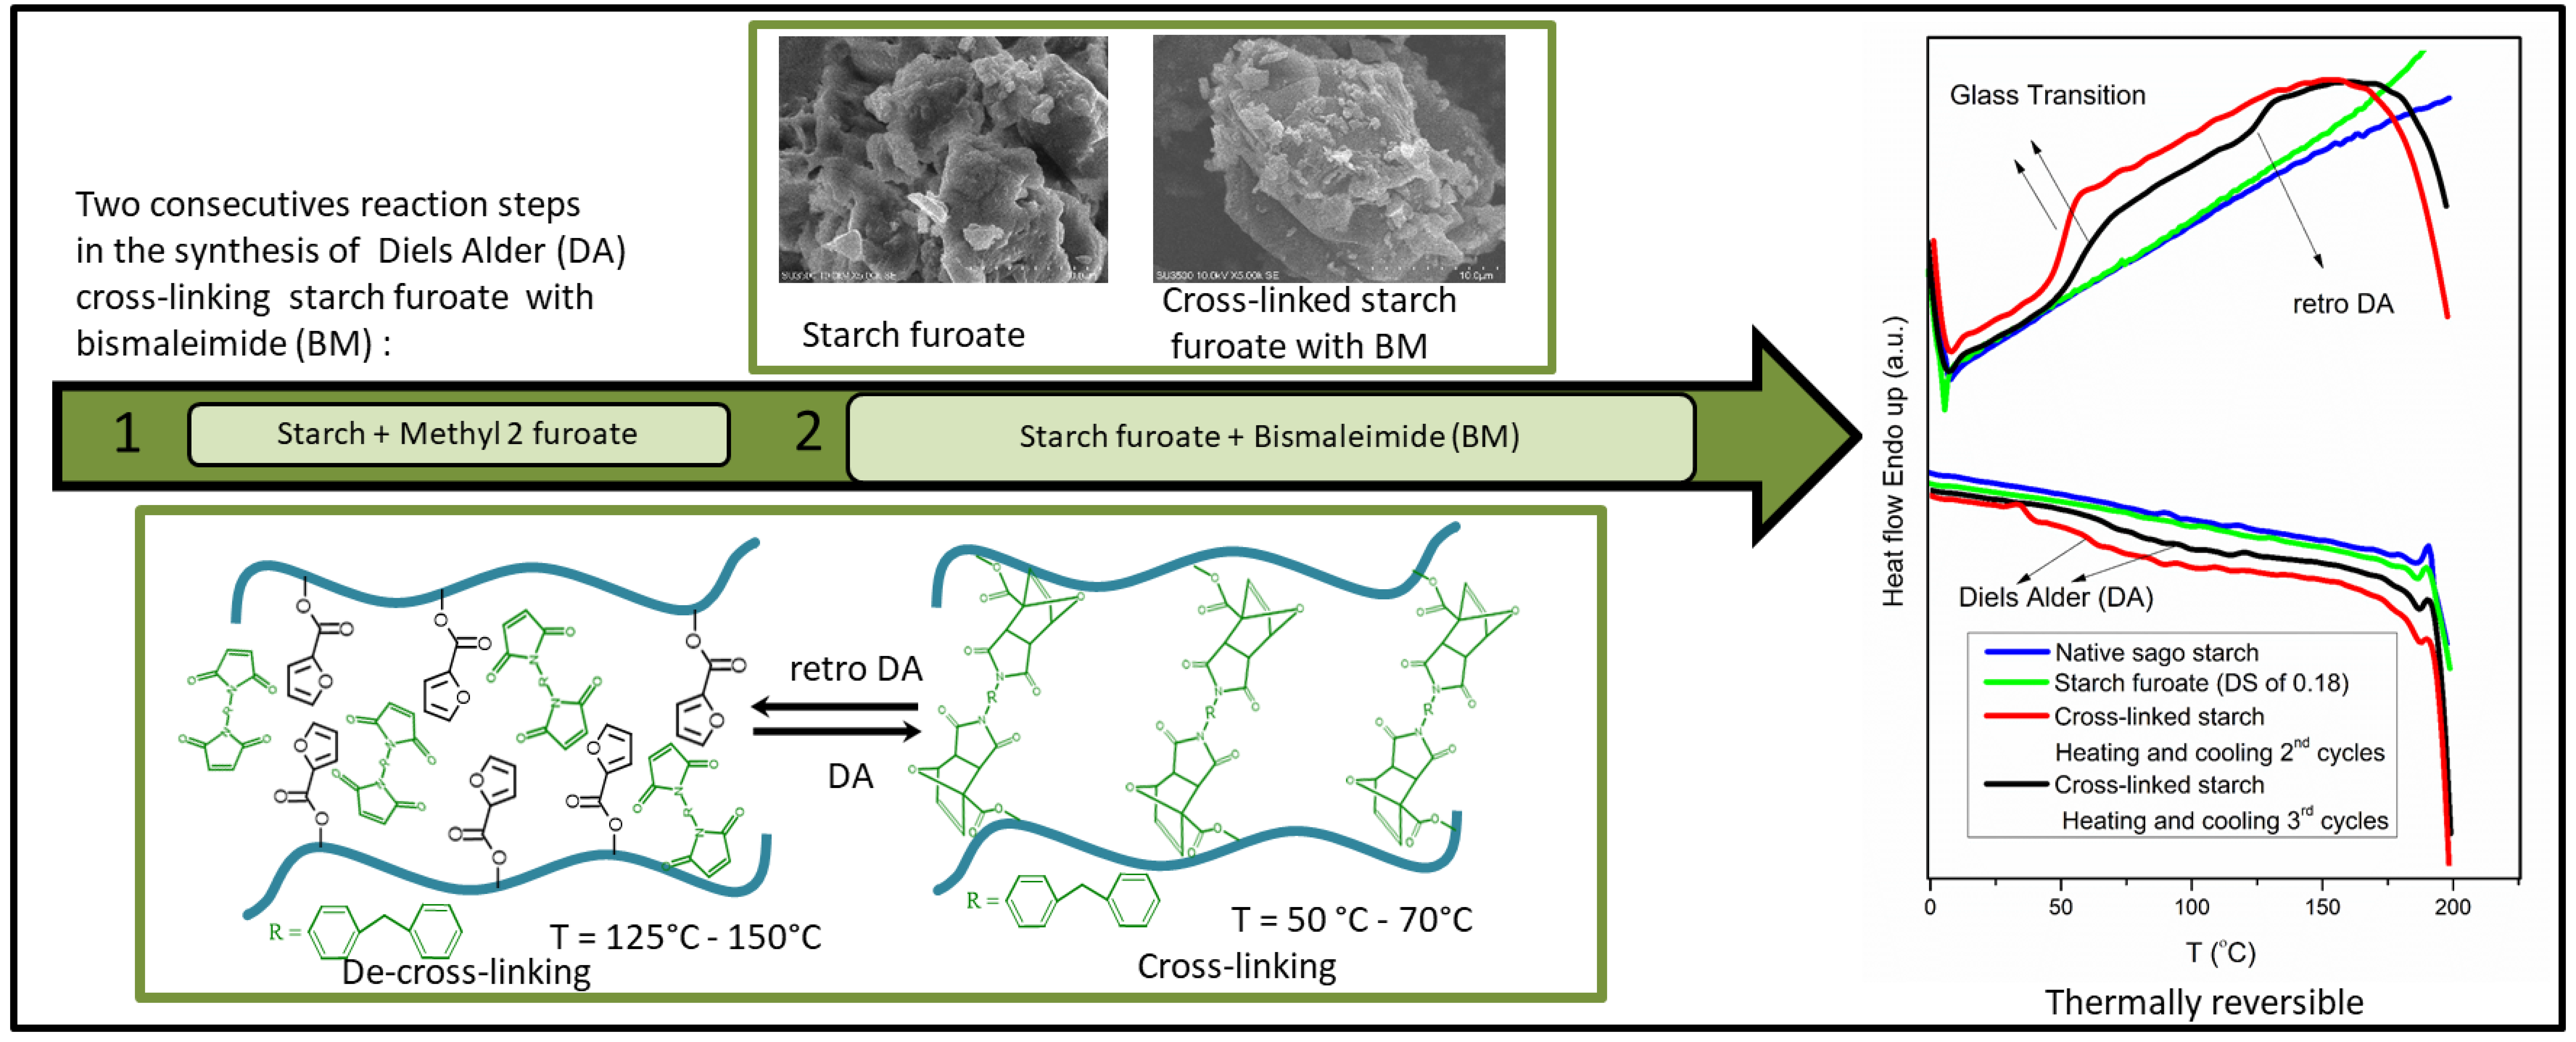 Cross-Linking of Sago Starch with Furan and Bismaleimide via the Diels-Alder Reaction